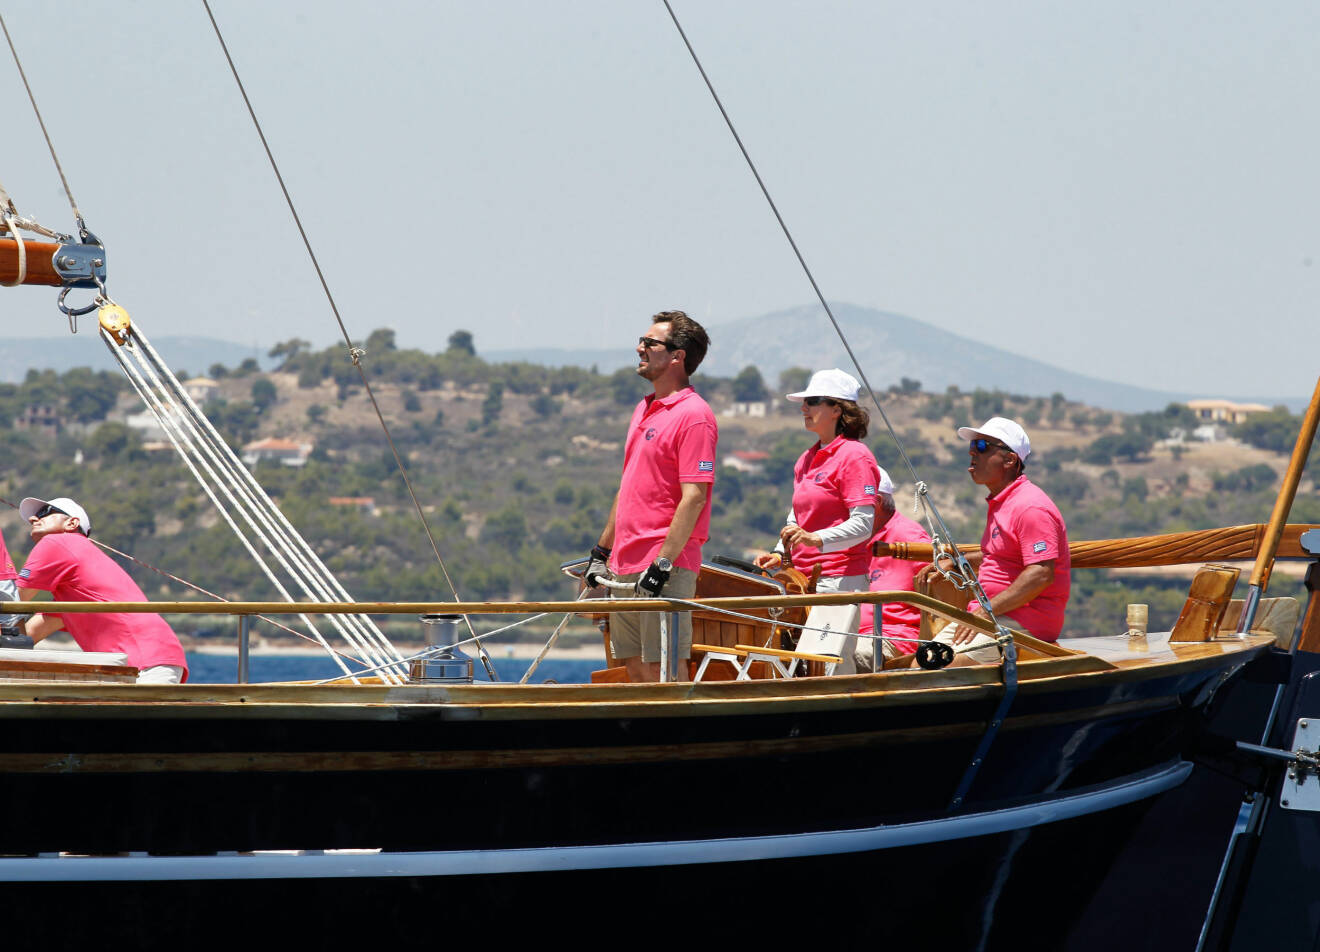 July 1, 2016 - Spetses Island, Greece - King CONSTANTINE of Greece with his son Prince NIKOLAOS of Greece participate with their traditional boat Afroessa, at Spetses Classic Yacht Regatta 2016. (Credit Image: © Aristidis Vafeiadakis via ZUMA Wire) (c) Zumapress / IBL